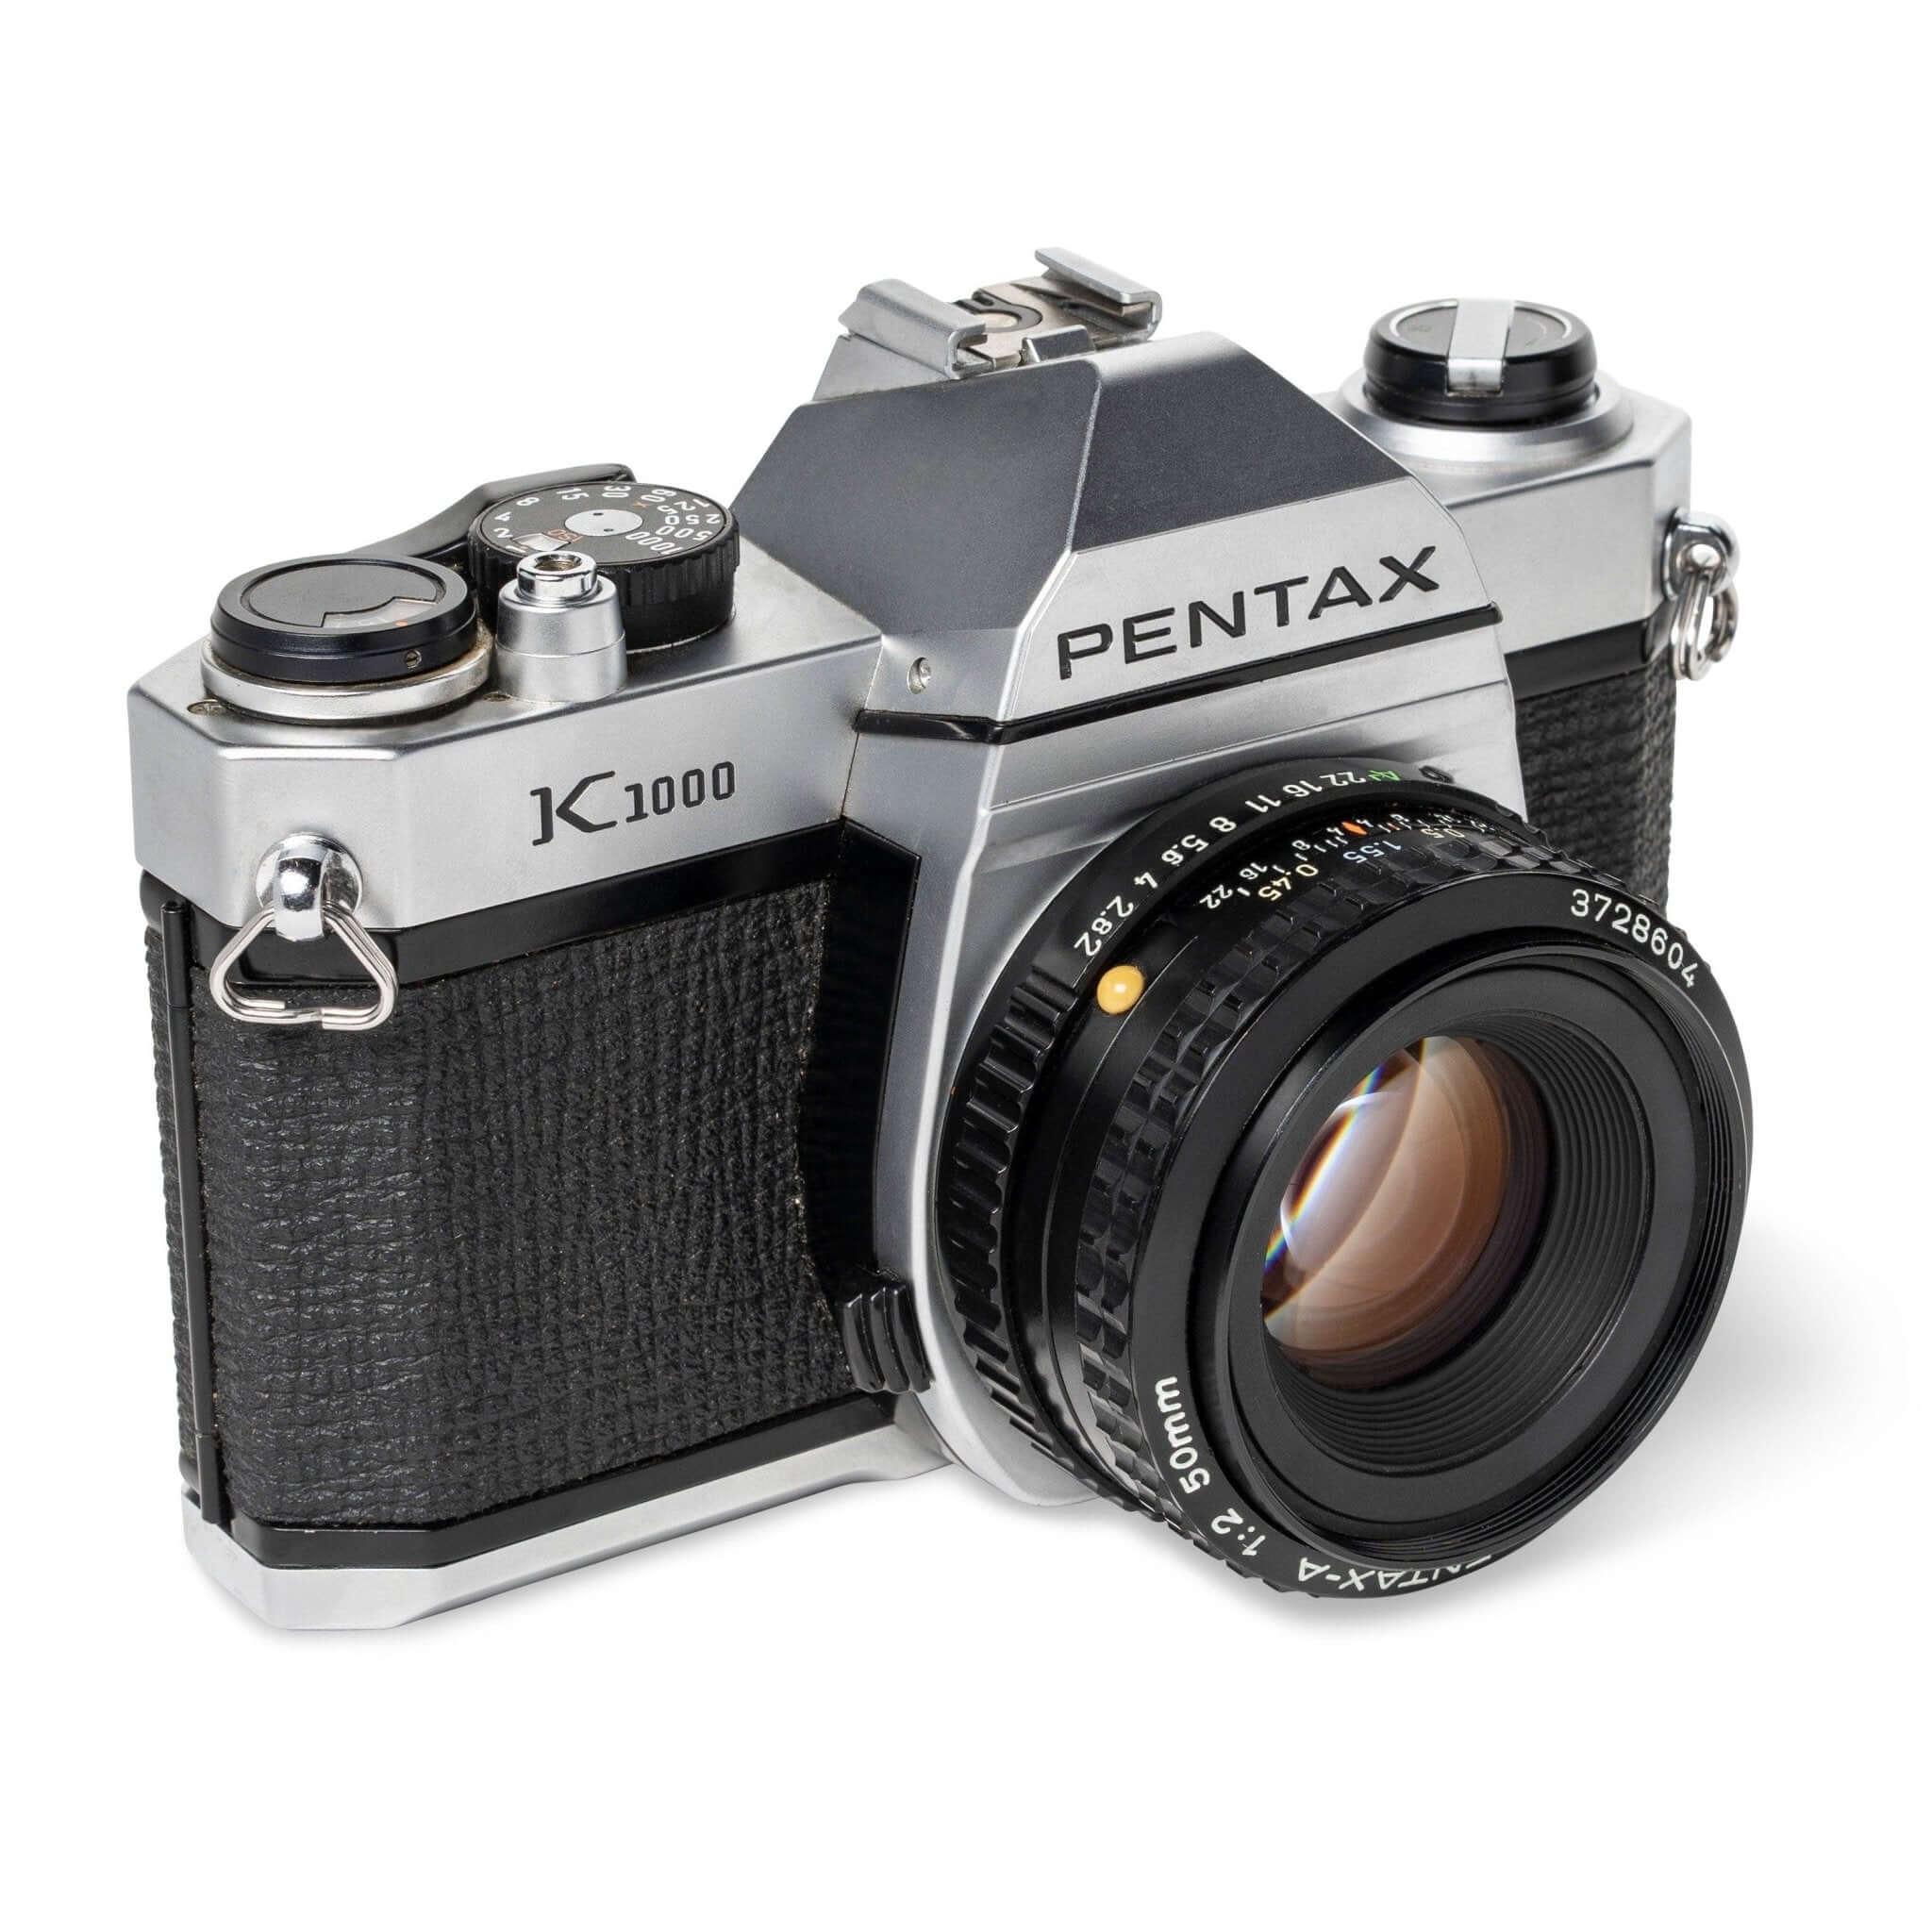 Pentax K1000 Bundle | 35mm Film Camera with Strap, Bag, and More! - Cute Camera Co.